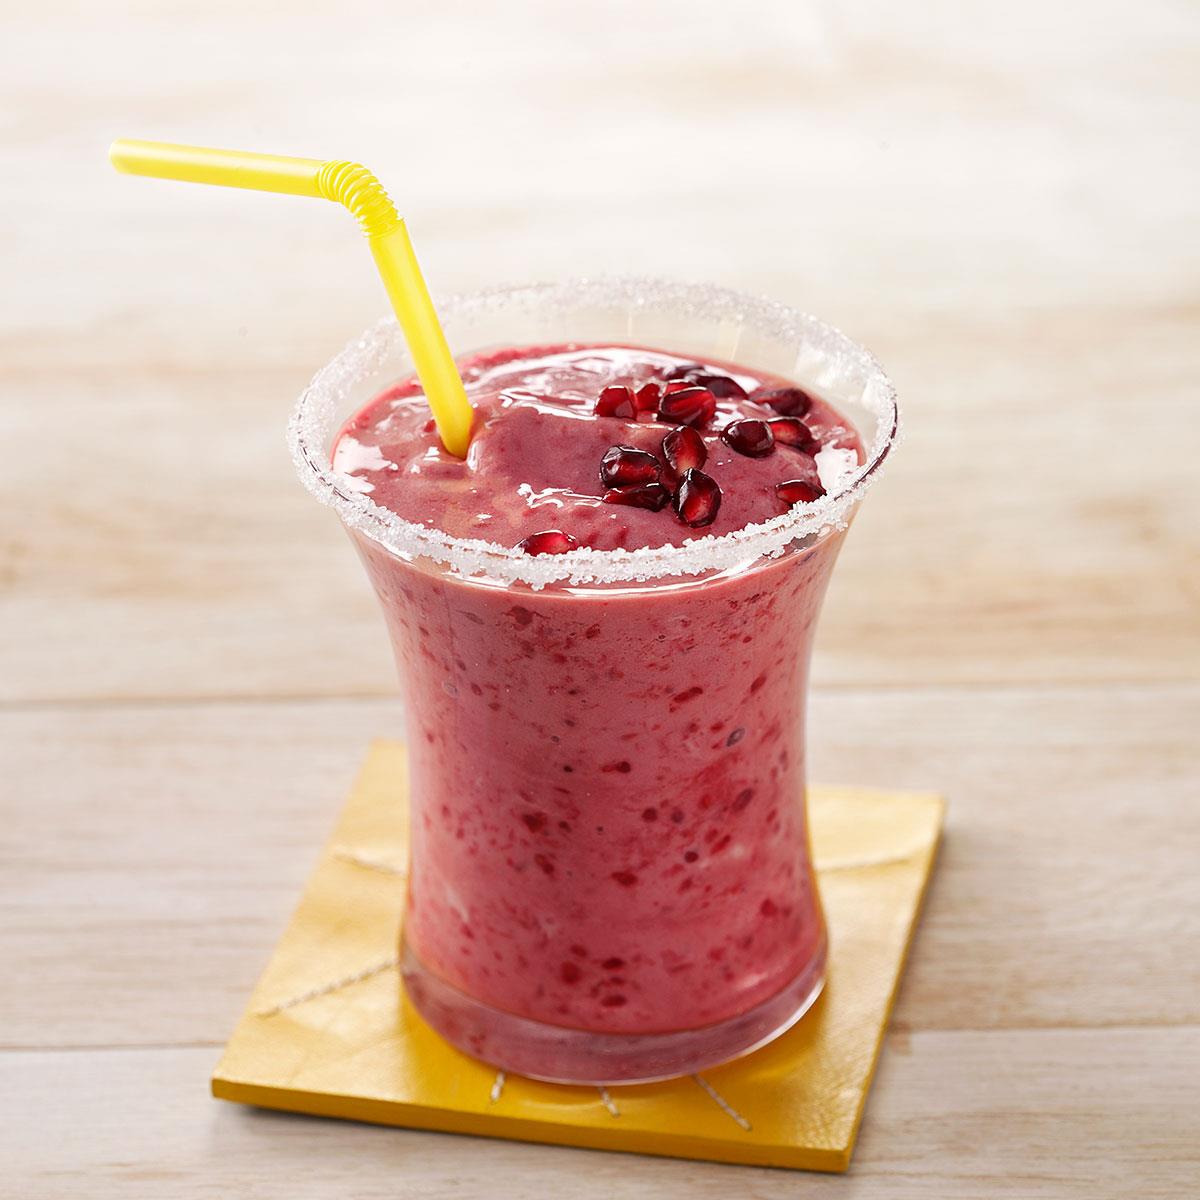 Raspberry Pomegranate Smoothies Recipe: How to Make It